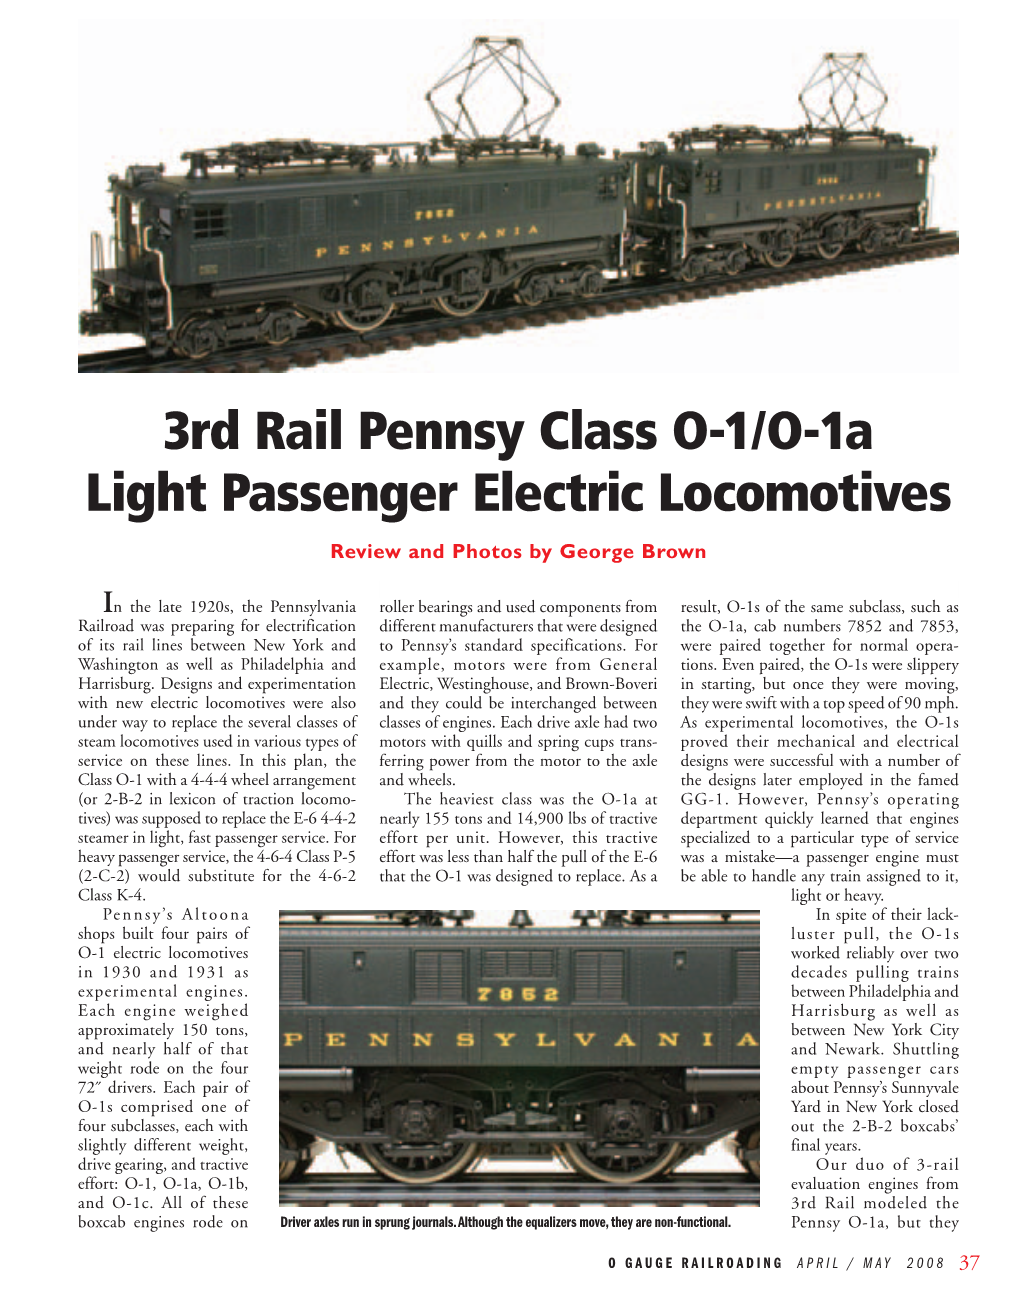 3Rd Rail Pennsy Class O-1/O-1A Light Passenger Electric Locomotives Review and Photos by George Brown